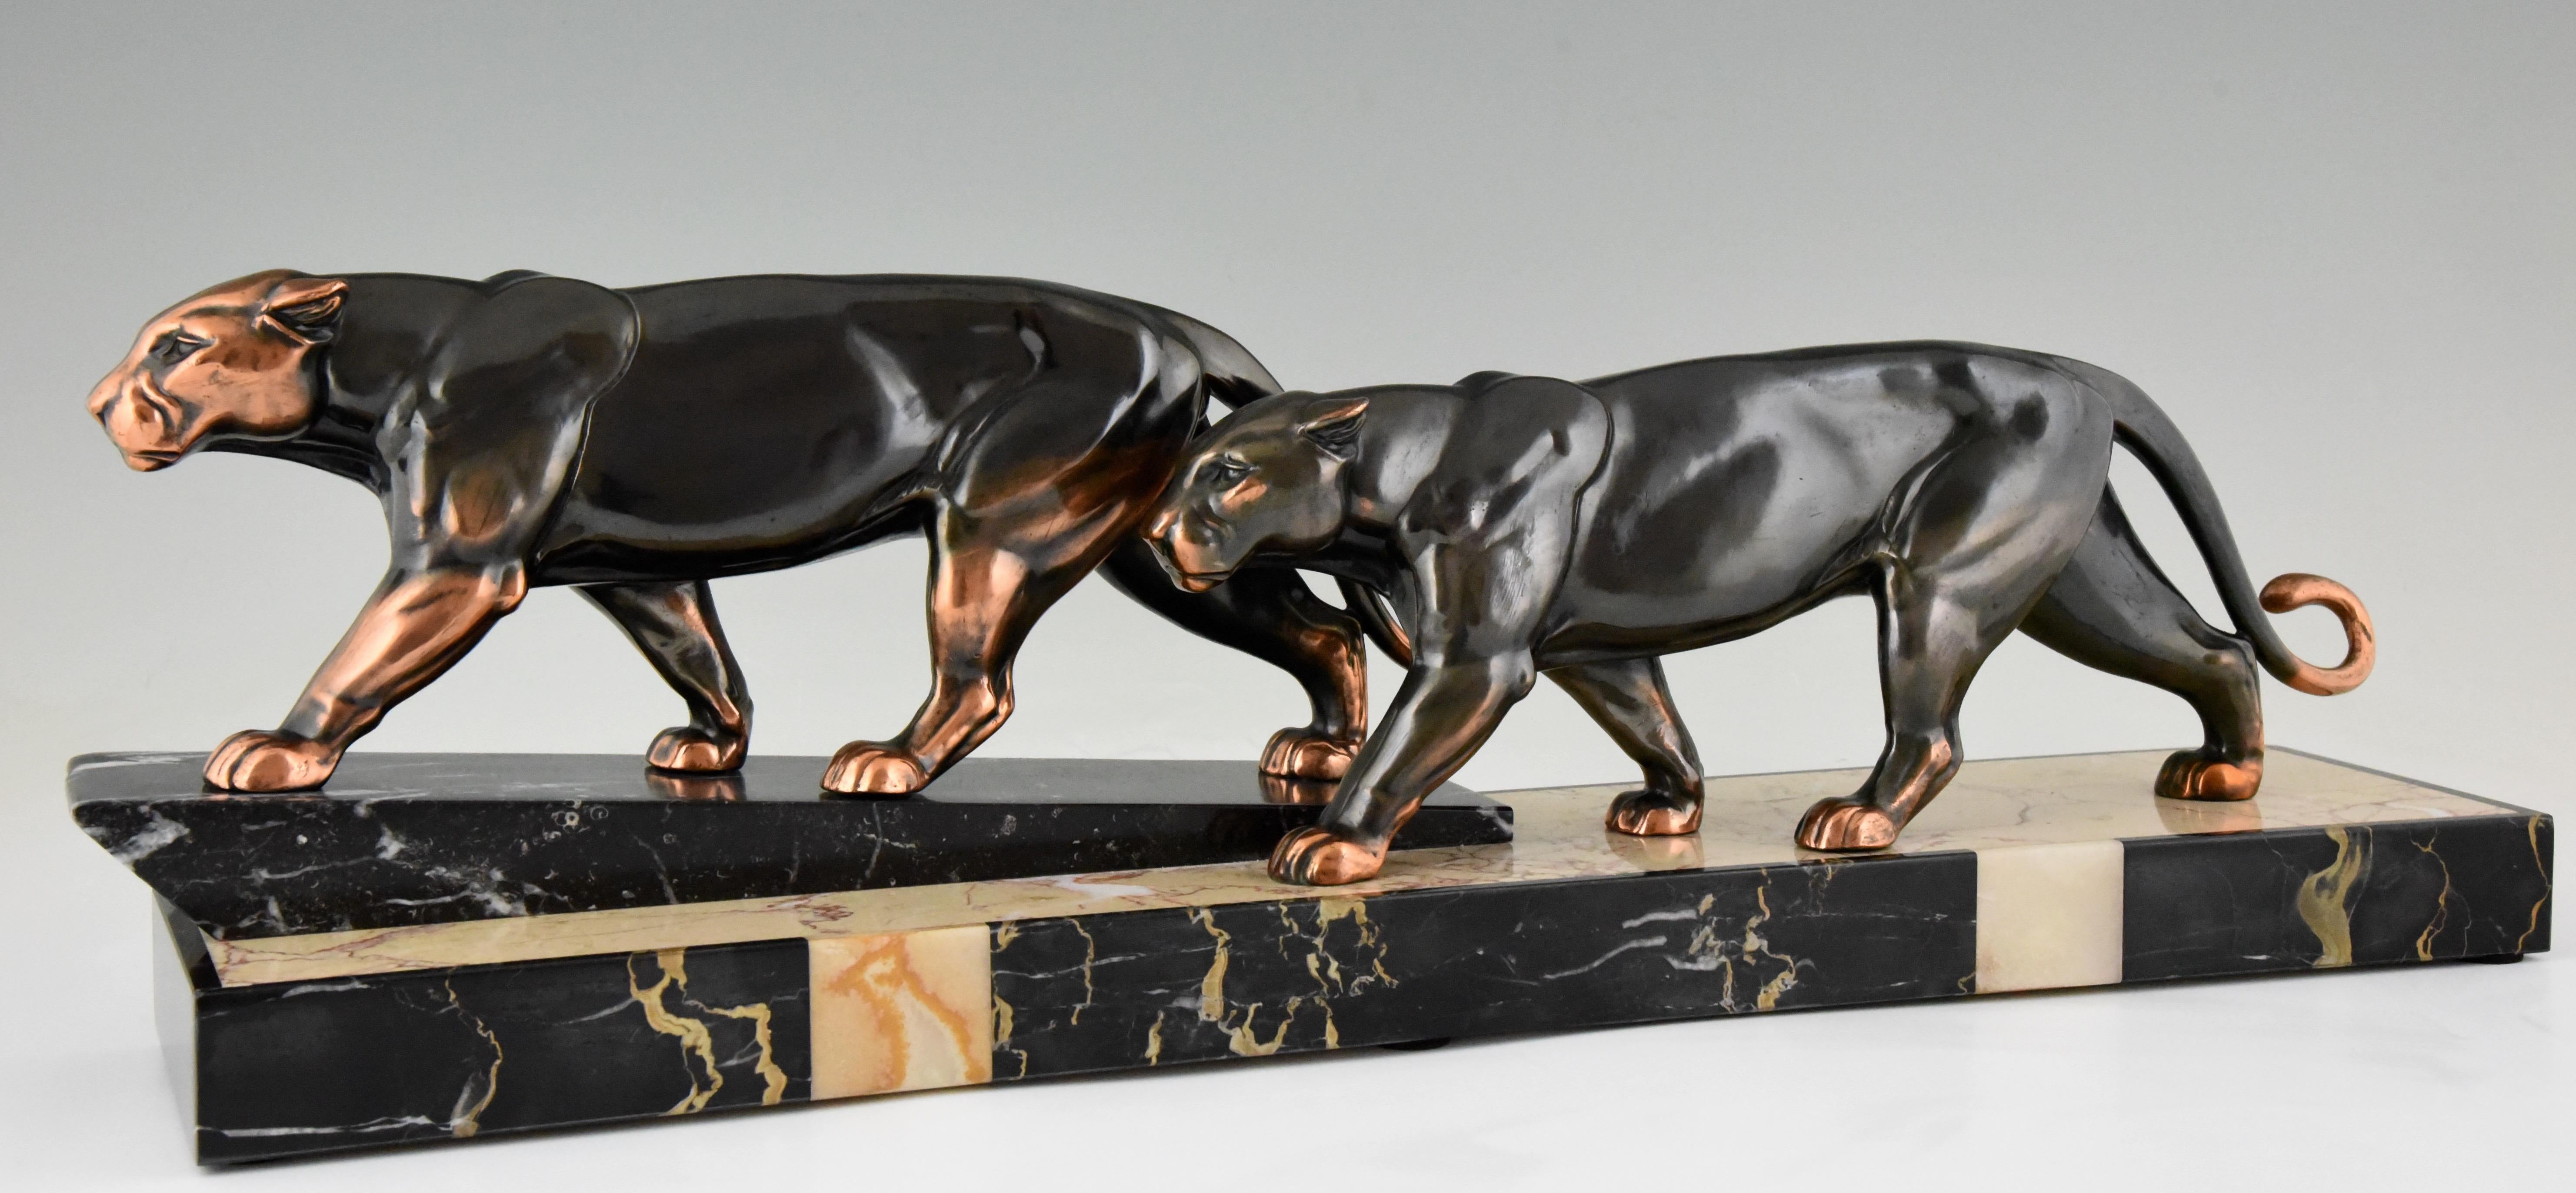 Art Deco group of two walking panthers by the French artist Alexandre Ouline in patinated Art Metal on a multi-color marble base, circa 1930. 

“Animals in bronze” by Christopher Payne. Antique collectors club. ?“Dictionnaire des peintres,